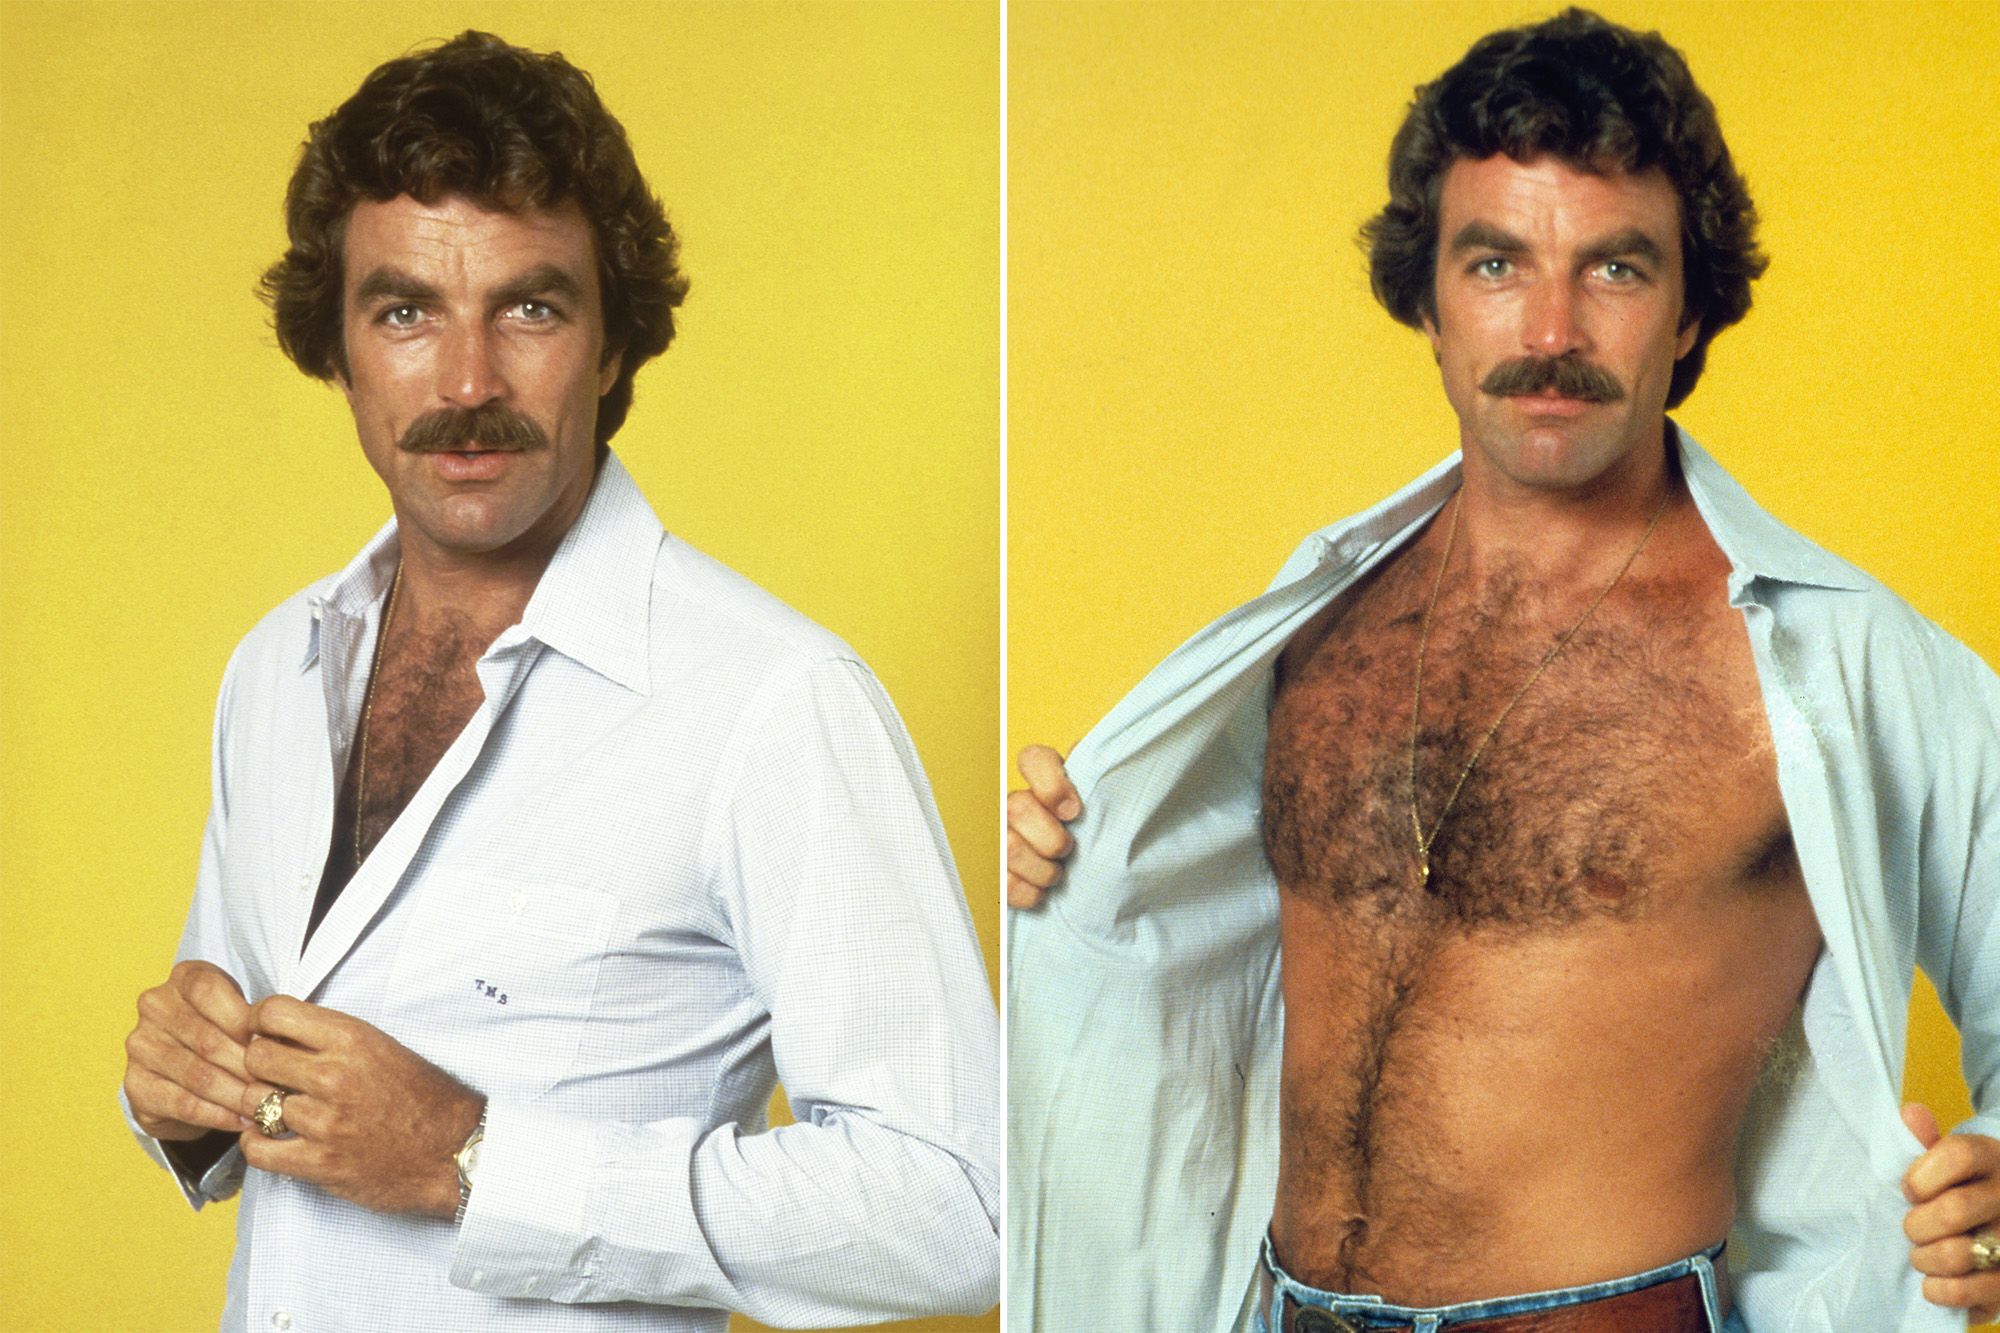 Tom Selleck Wiki, Bio, Age, Net Worth, and Other Facts